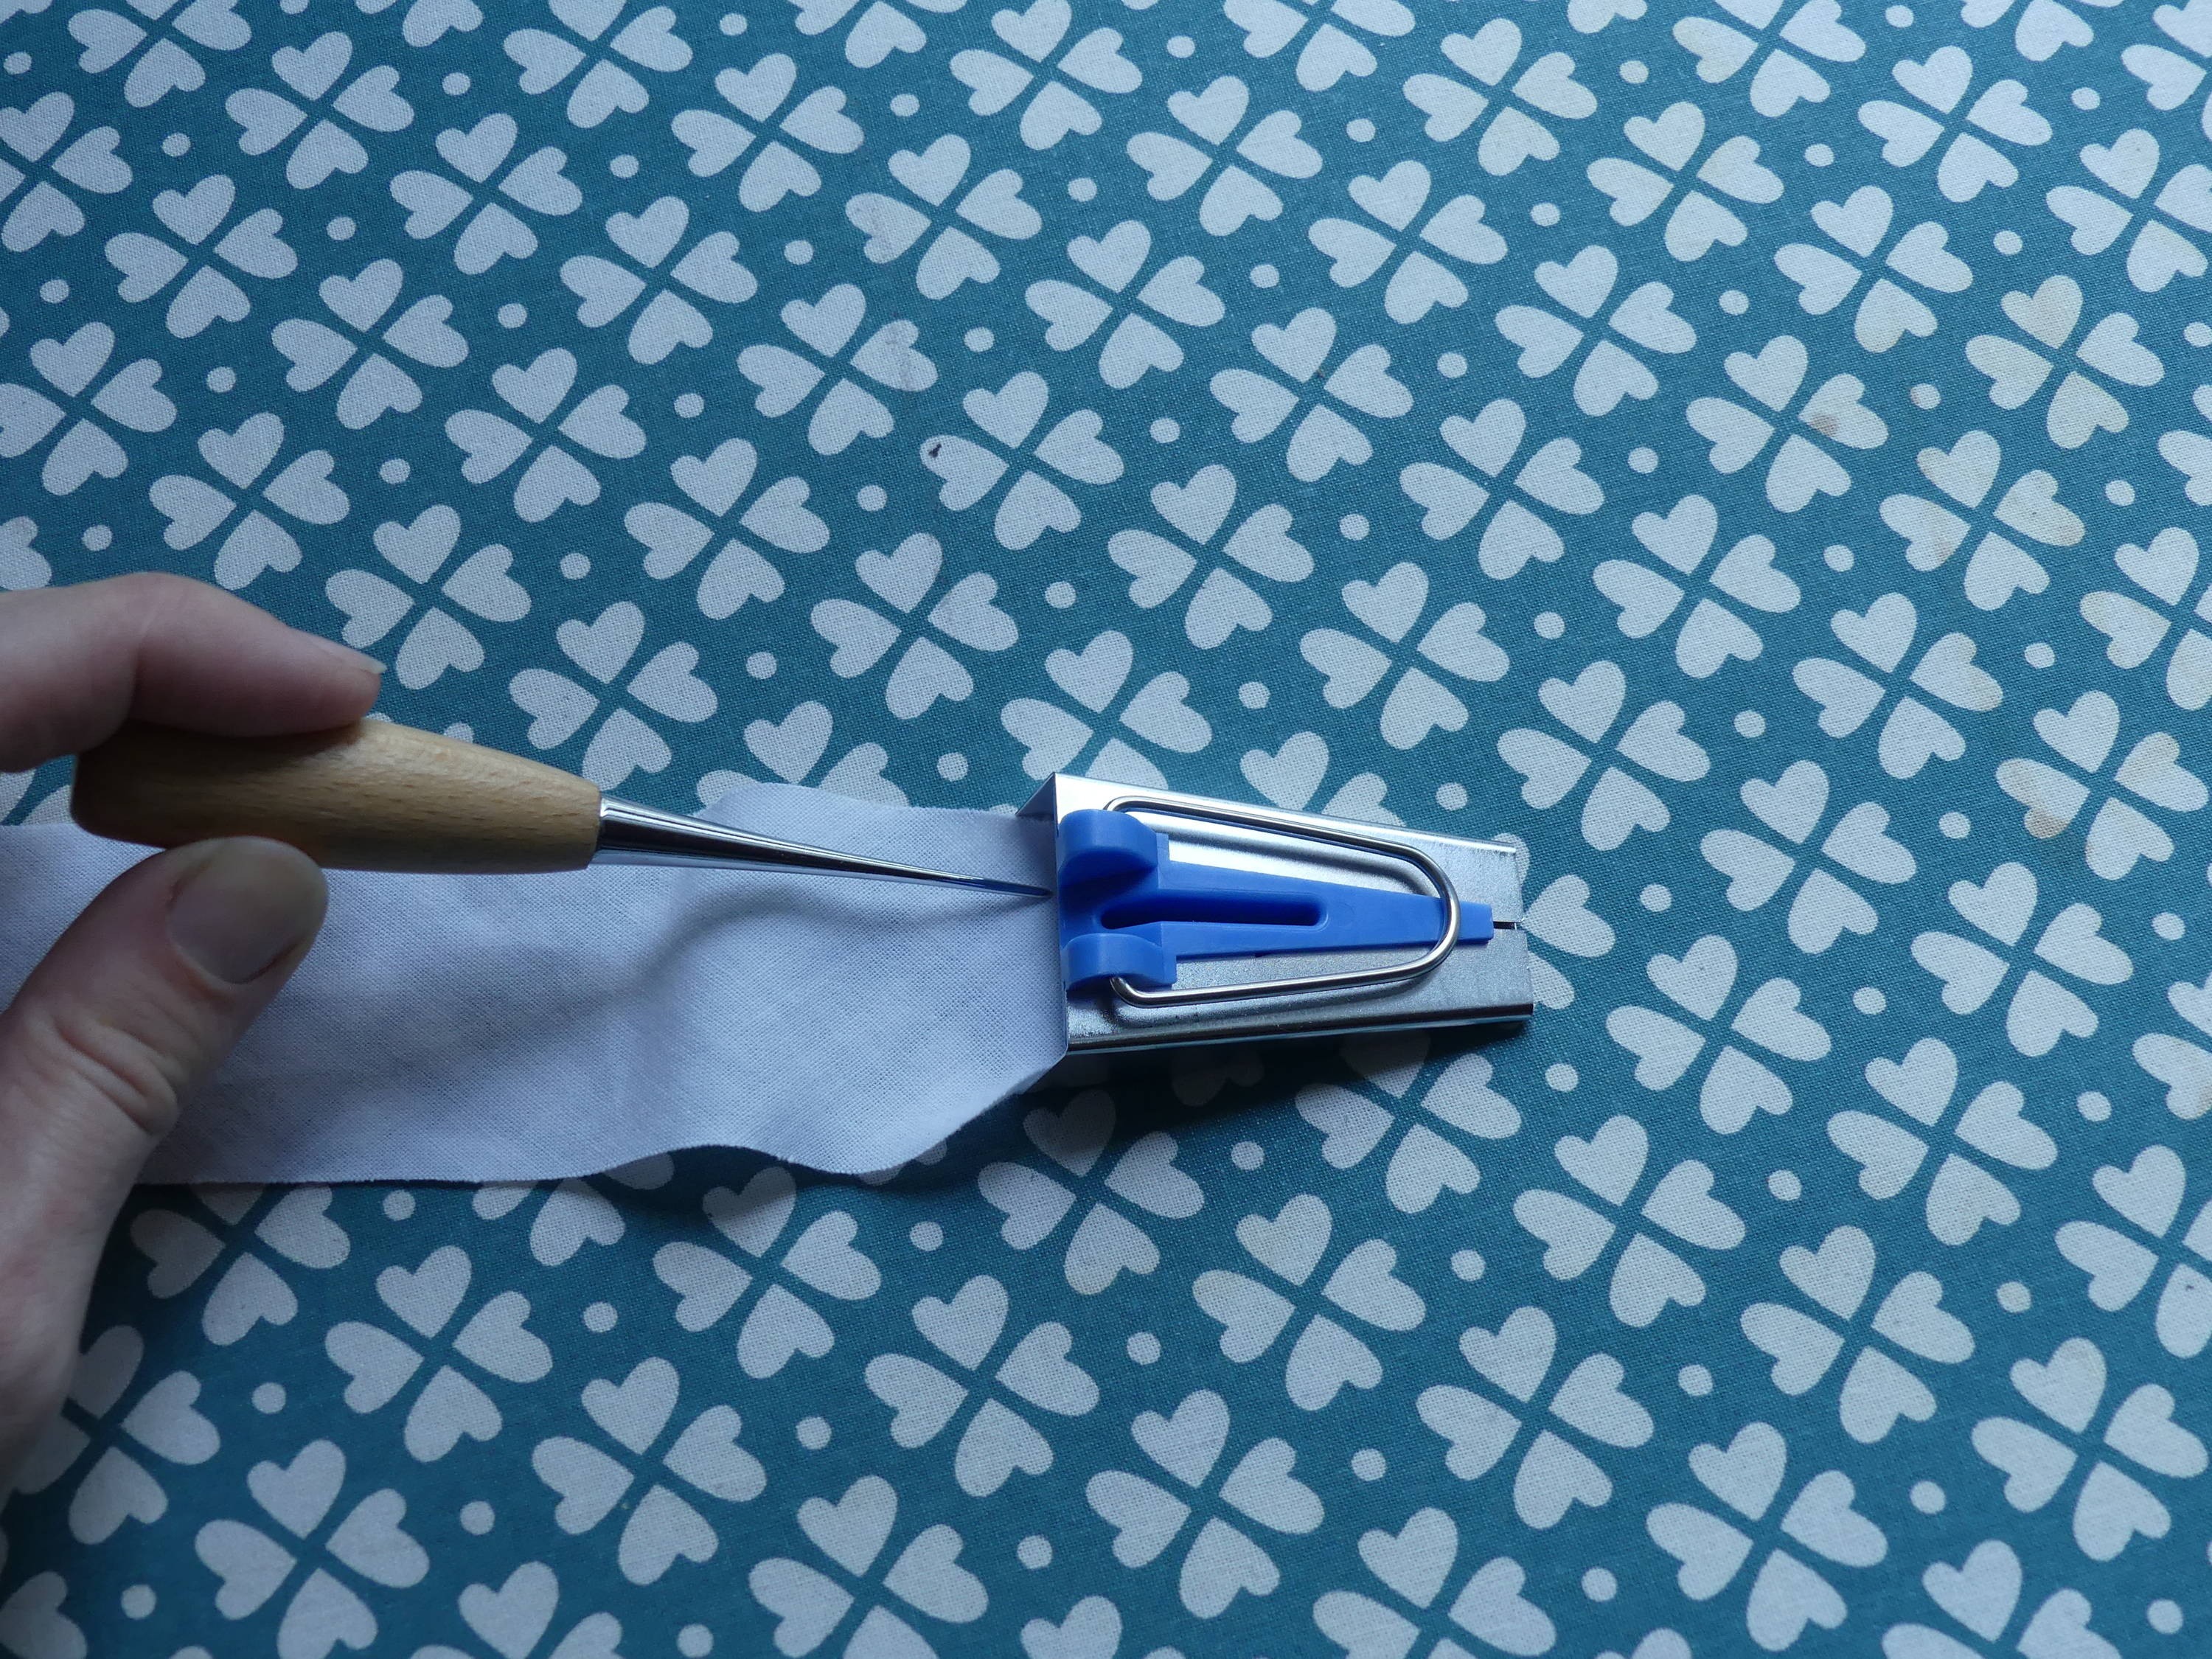 Using an Awl to push the fabric through the Bias Tape Maker